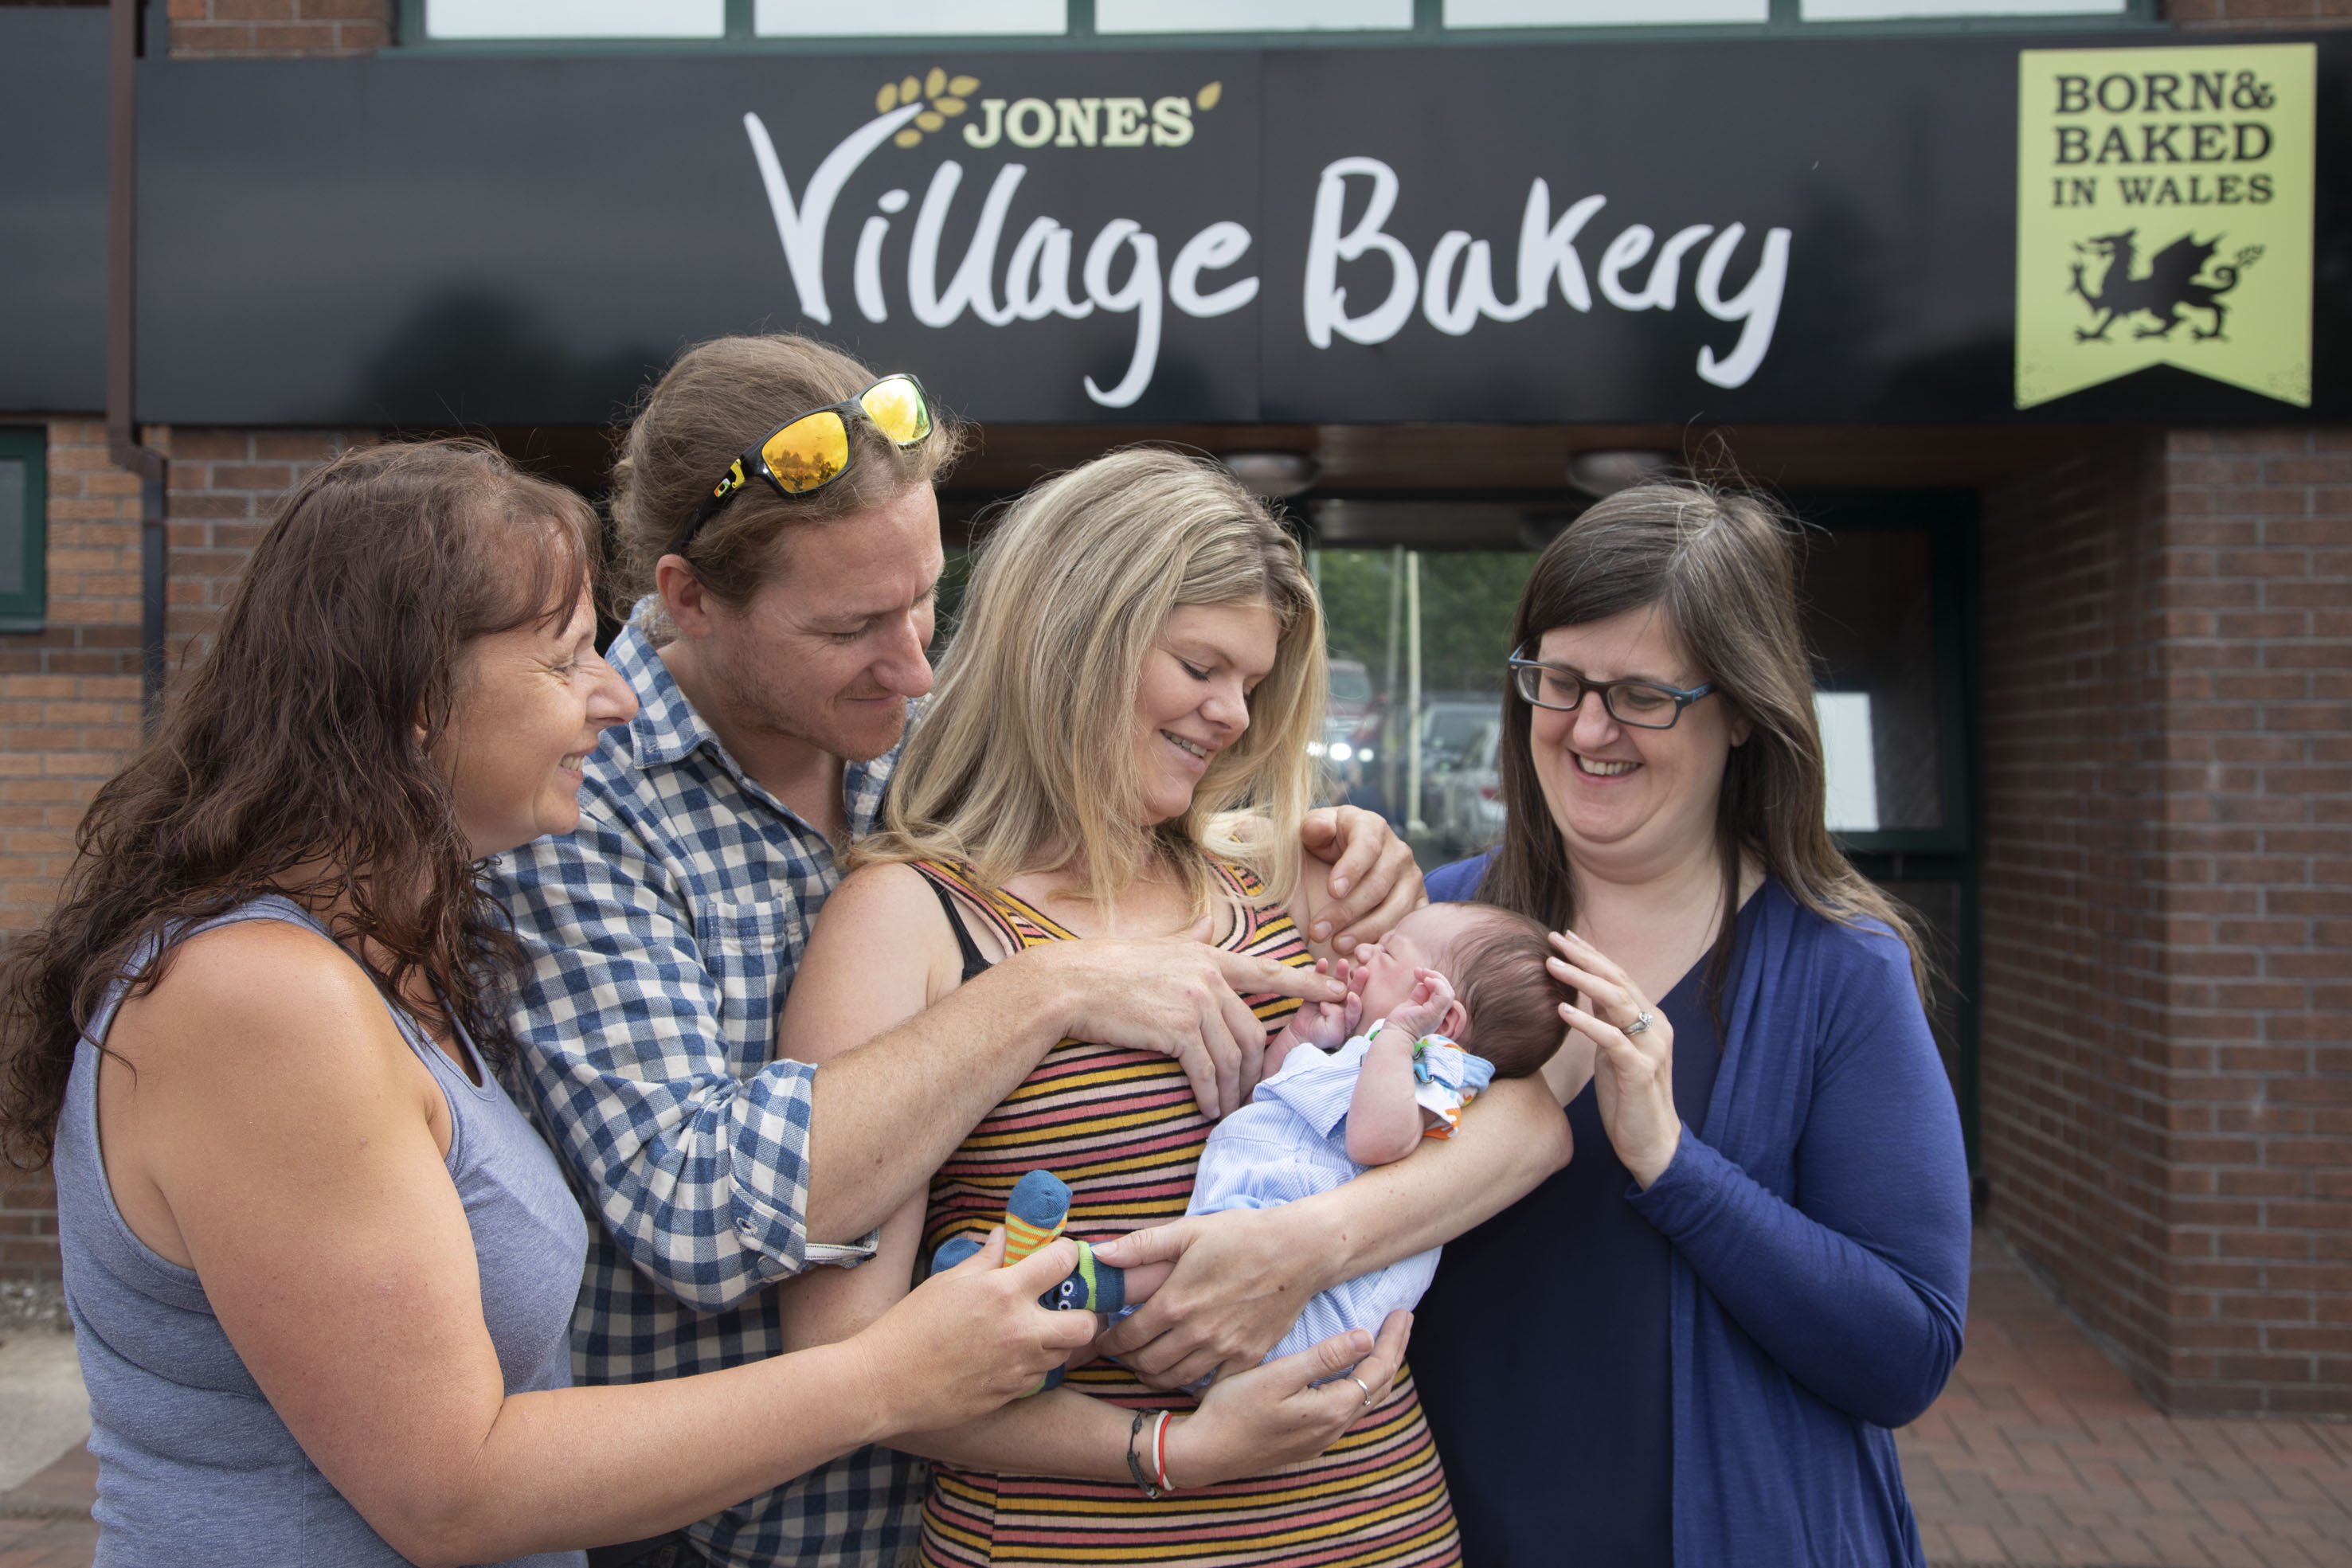 Mum and dad return with baby Tao to say heartfelt thanks to bakery staff who helped them in hour of “knead”